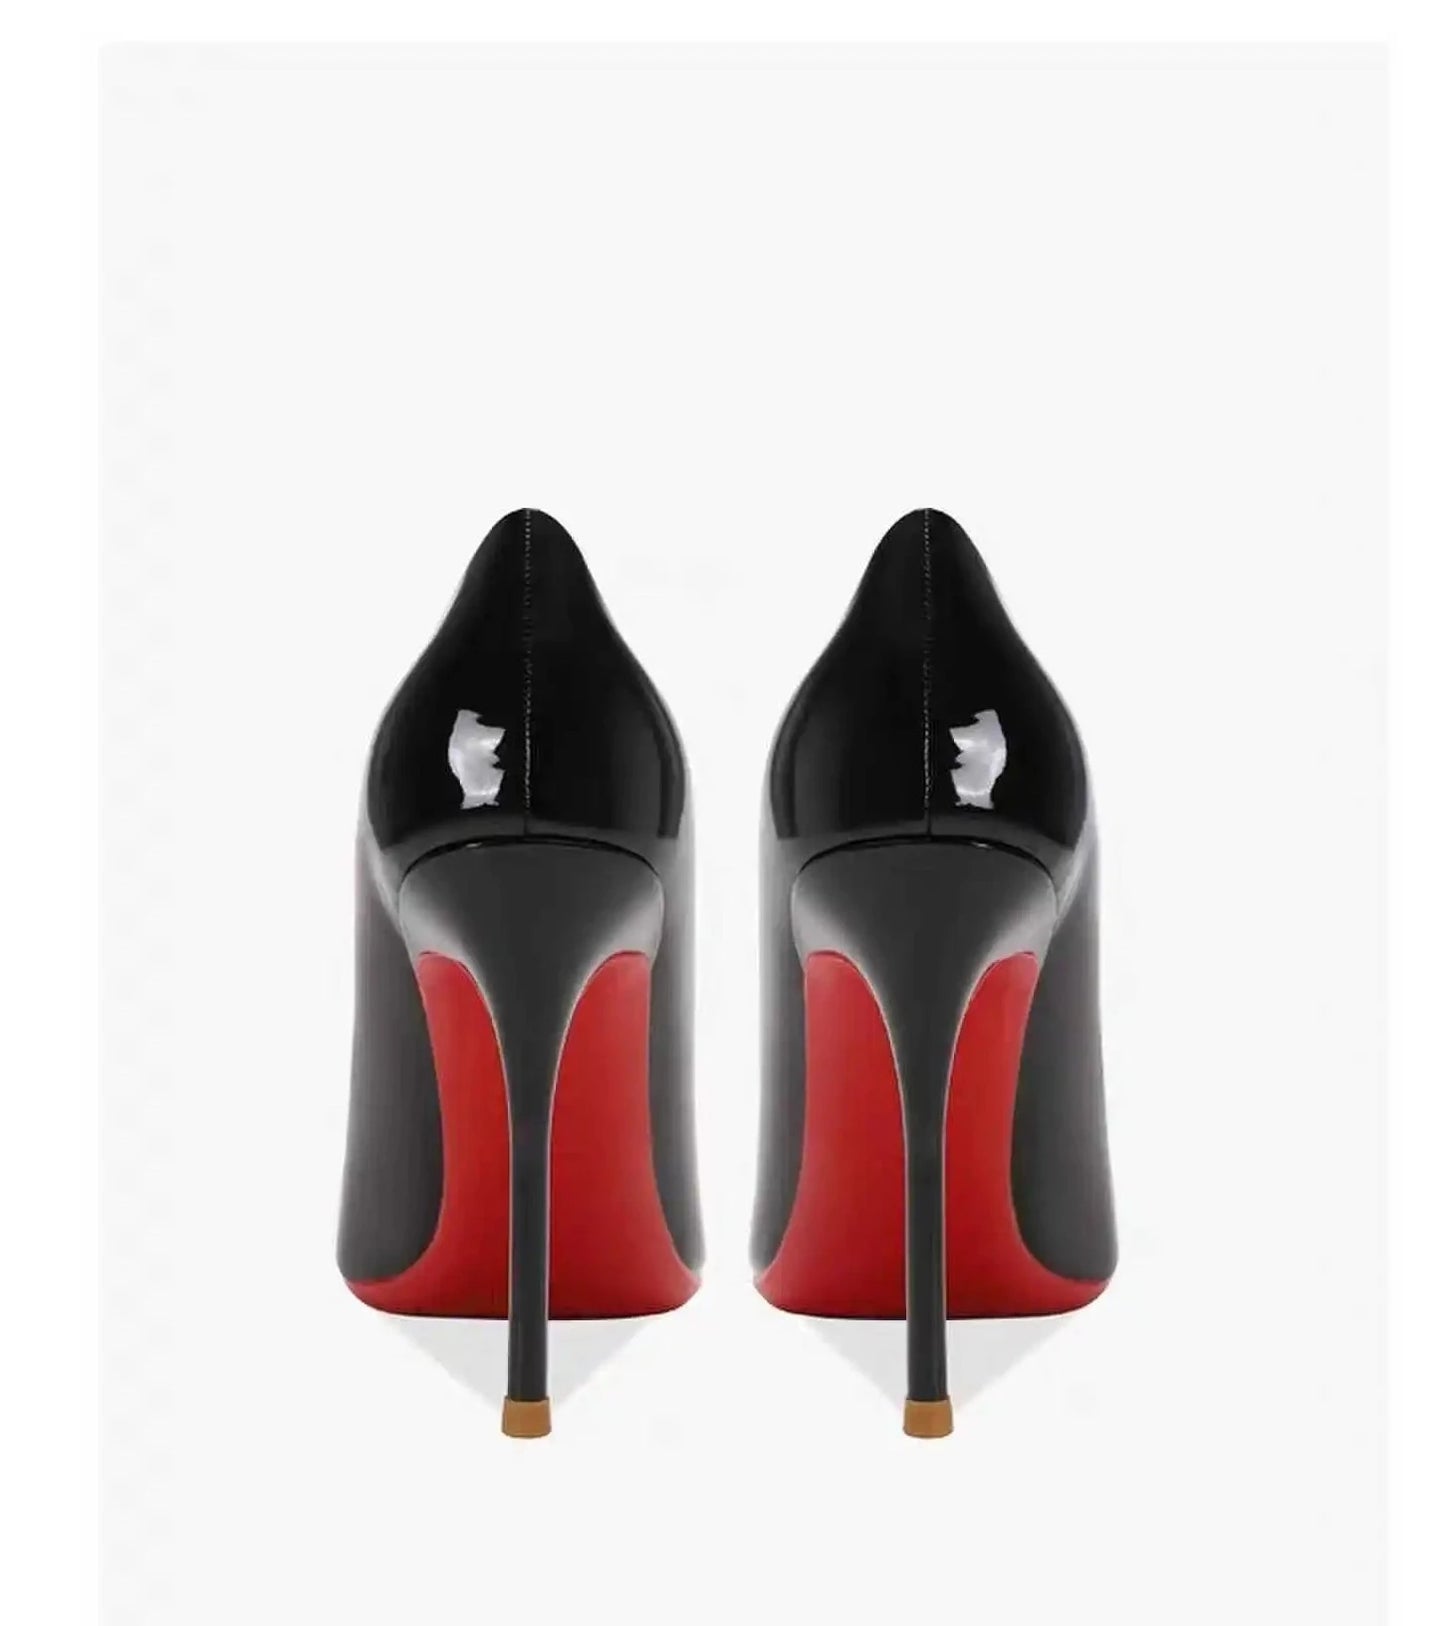 High Heel Pumps inspired by Christian Louboutin